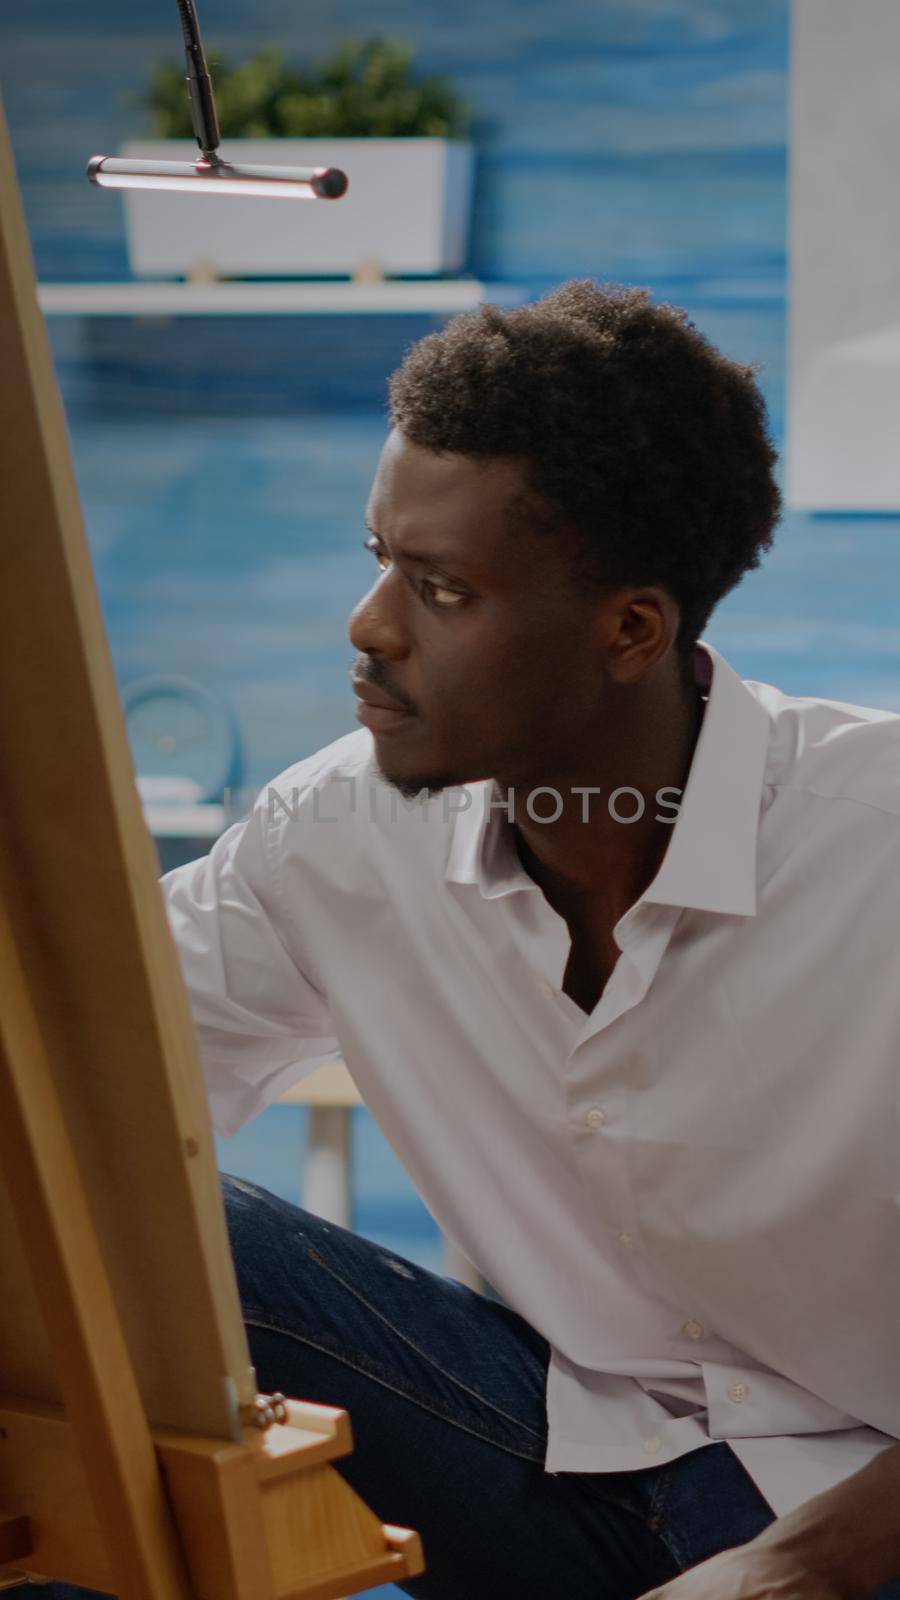 Artist of african american ethnicity working on drawing of vase at art studio. Black young adult using pencil and canvas on easel for creative masterpiece. Person with fine art project